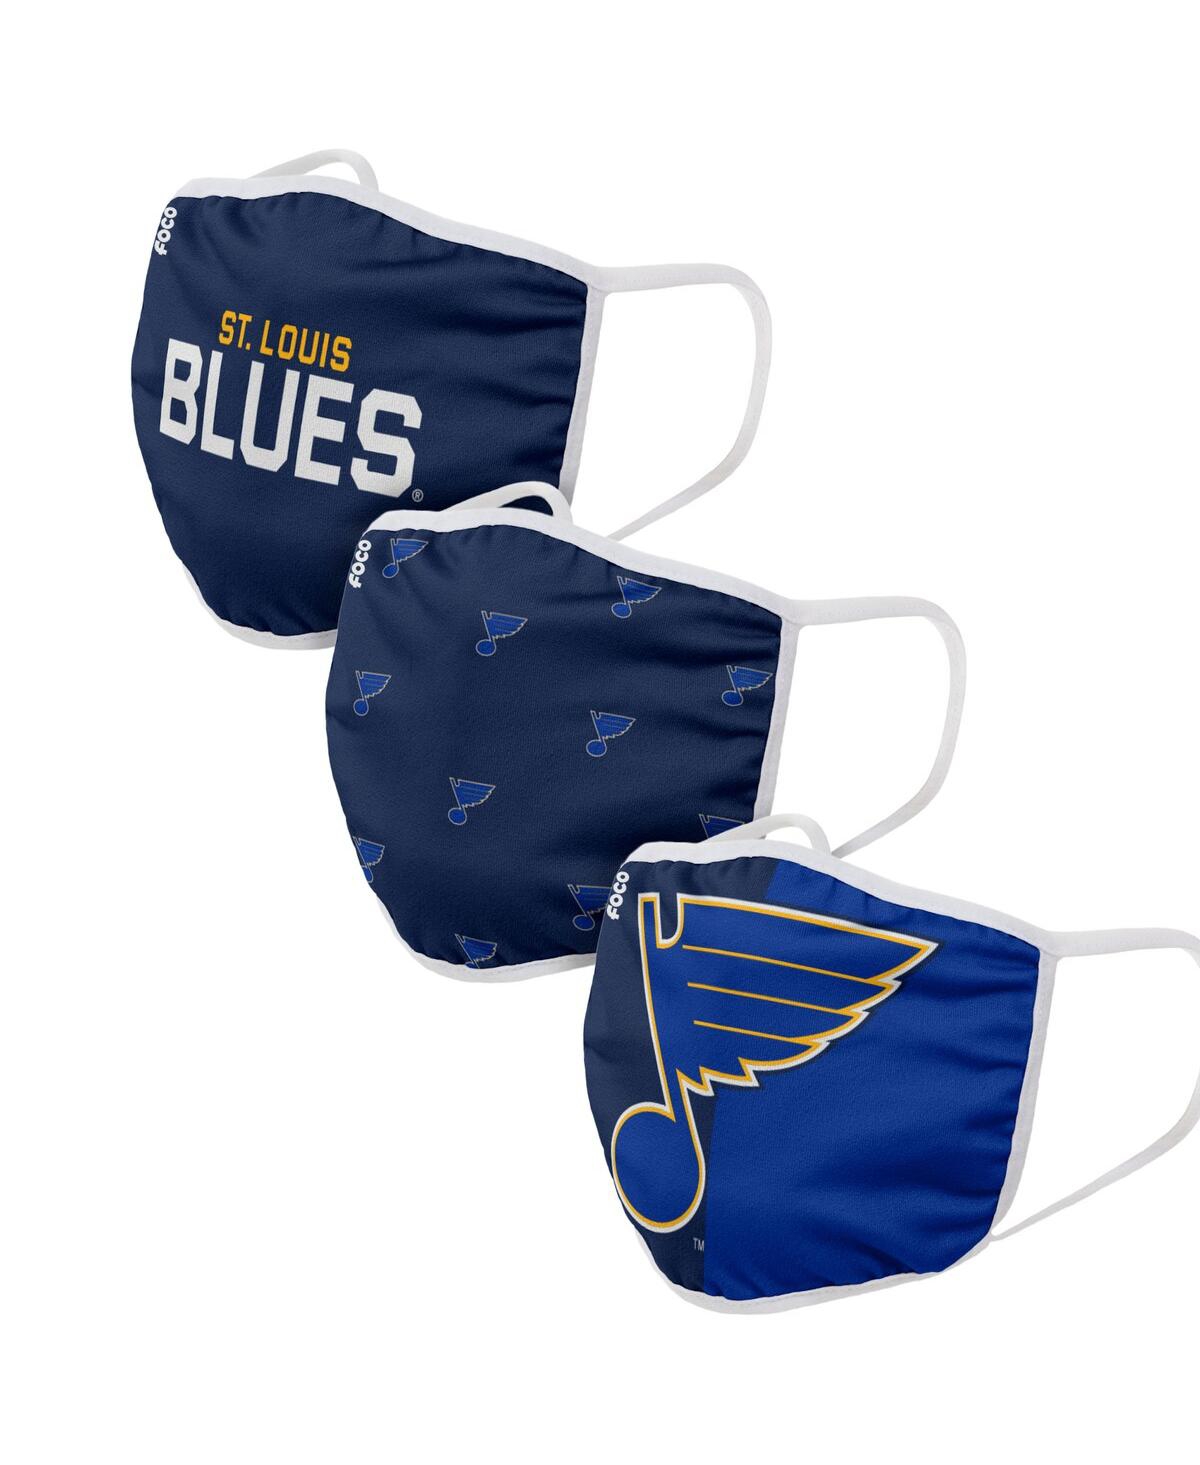 Men's and Women's Foco St. Louis Blues Face Covering 3-Pack - Blue